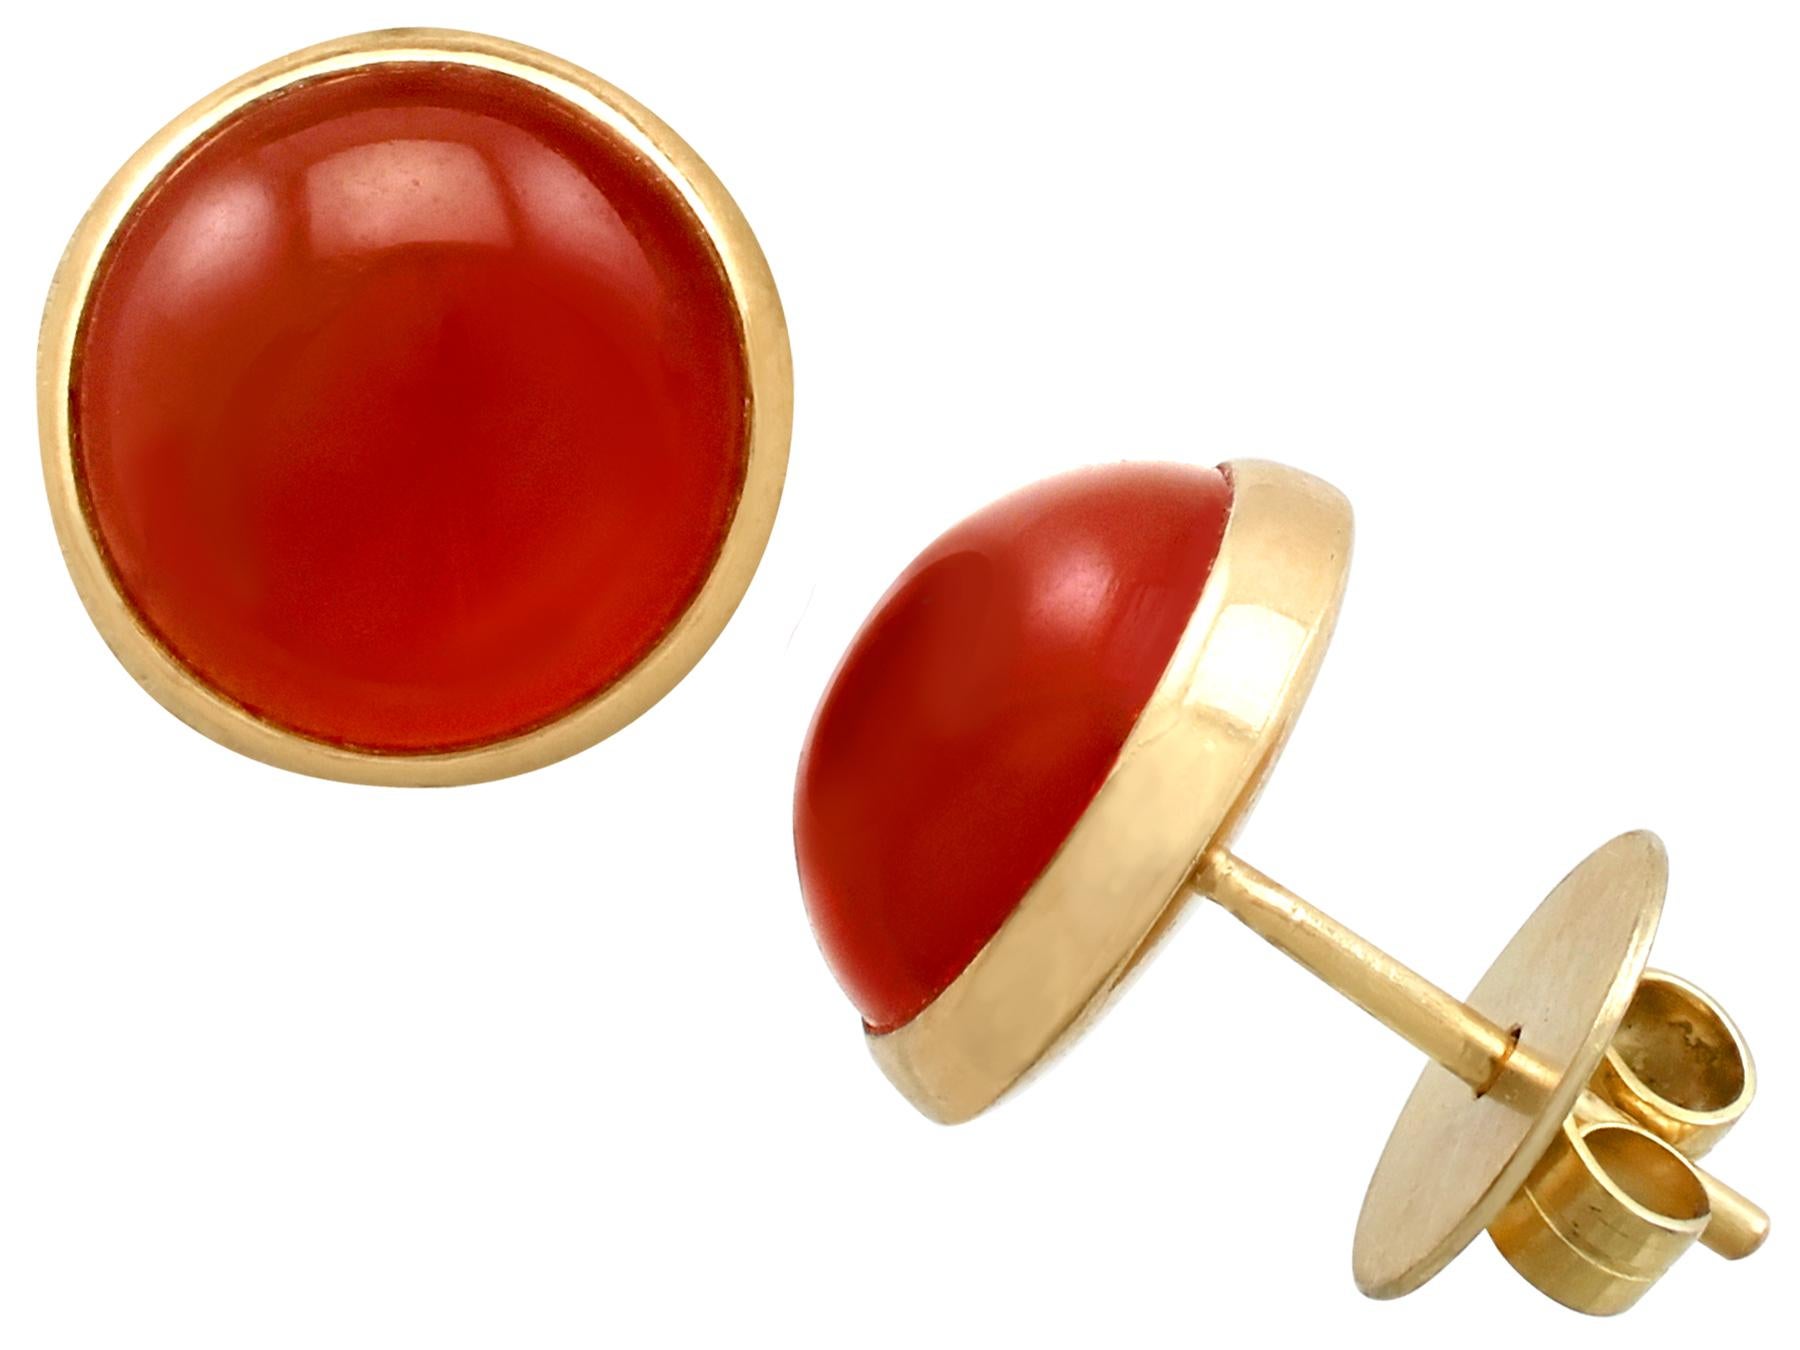 An impressive pair of vintage 1980s 5.50 carat agate and 18 karat yellow gold stud earrings; part of our diverse gemstone jewelry and estate jewelry collections.

These fine and impressive vintage cabochon cut earrings have been crafted in 18k